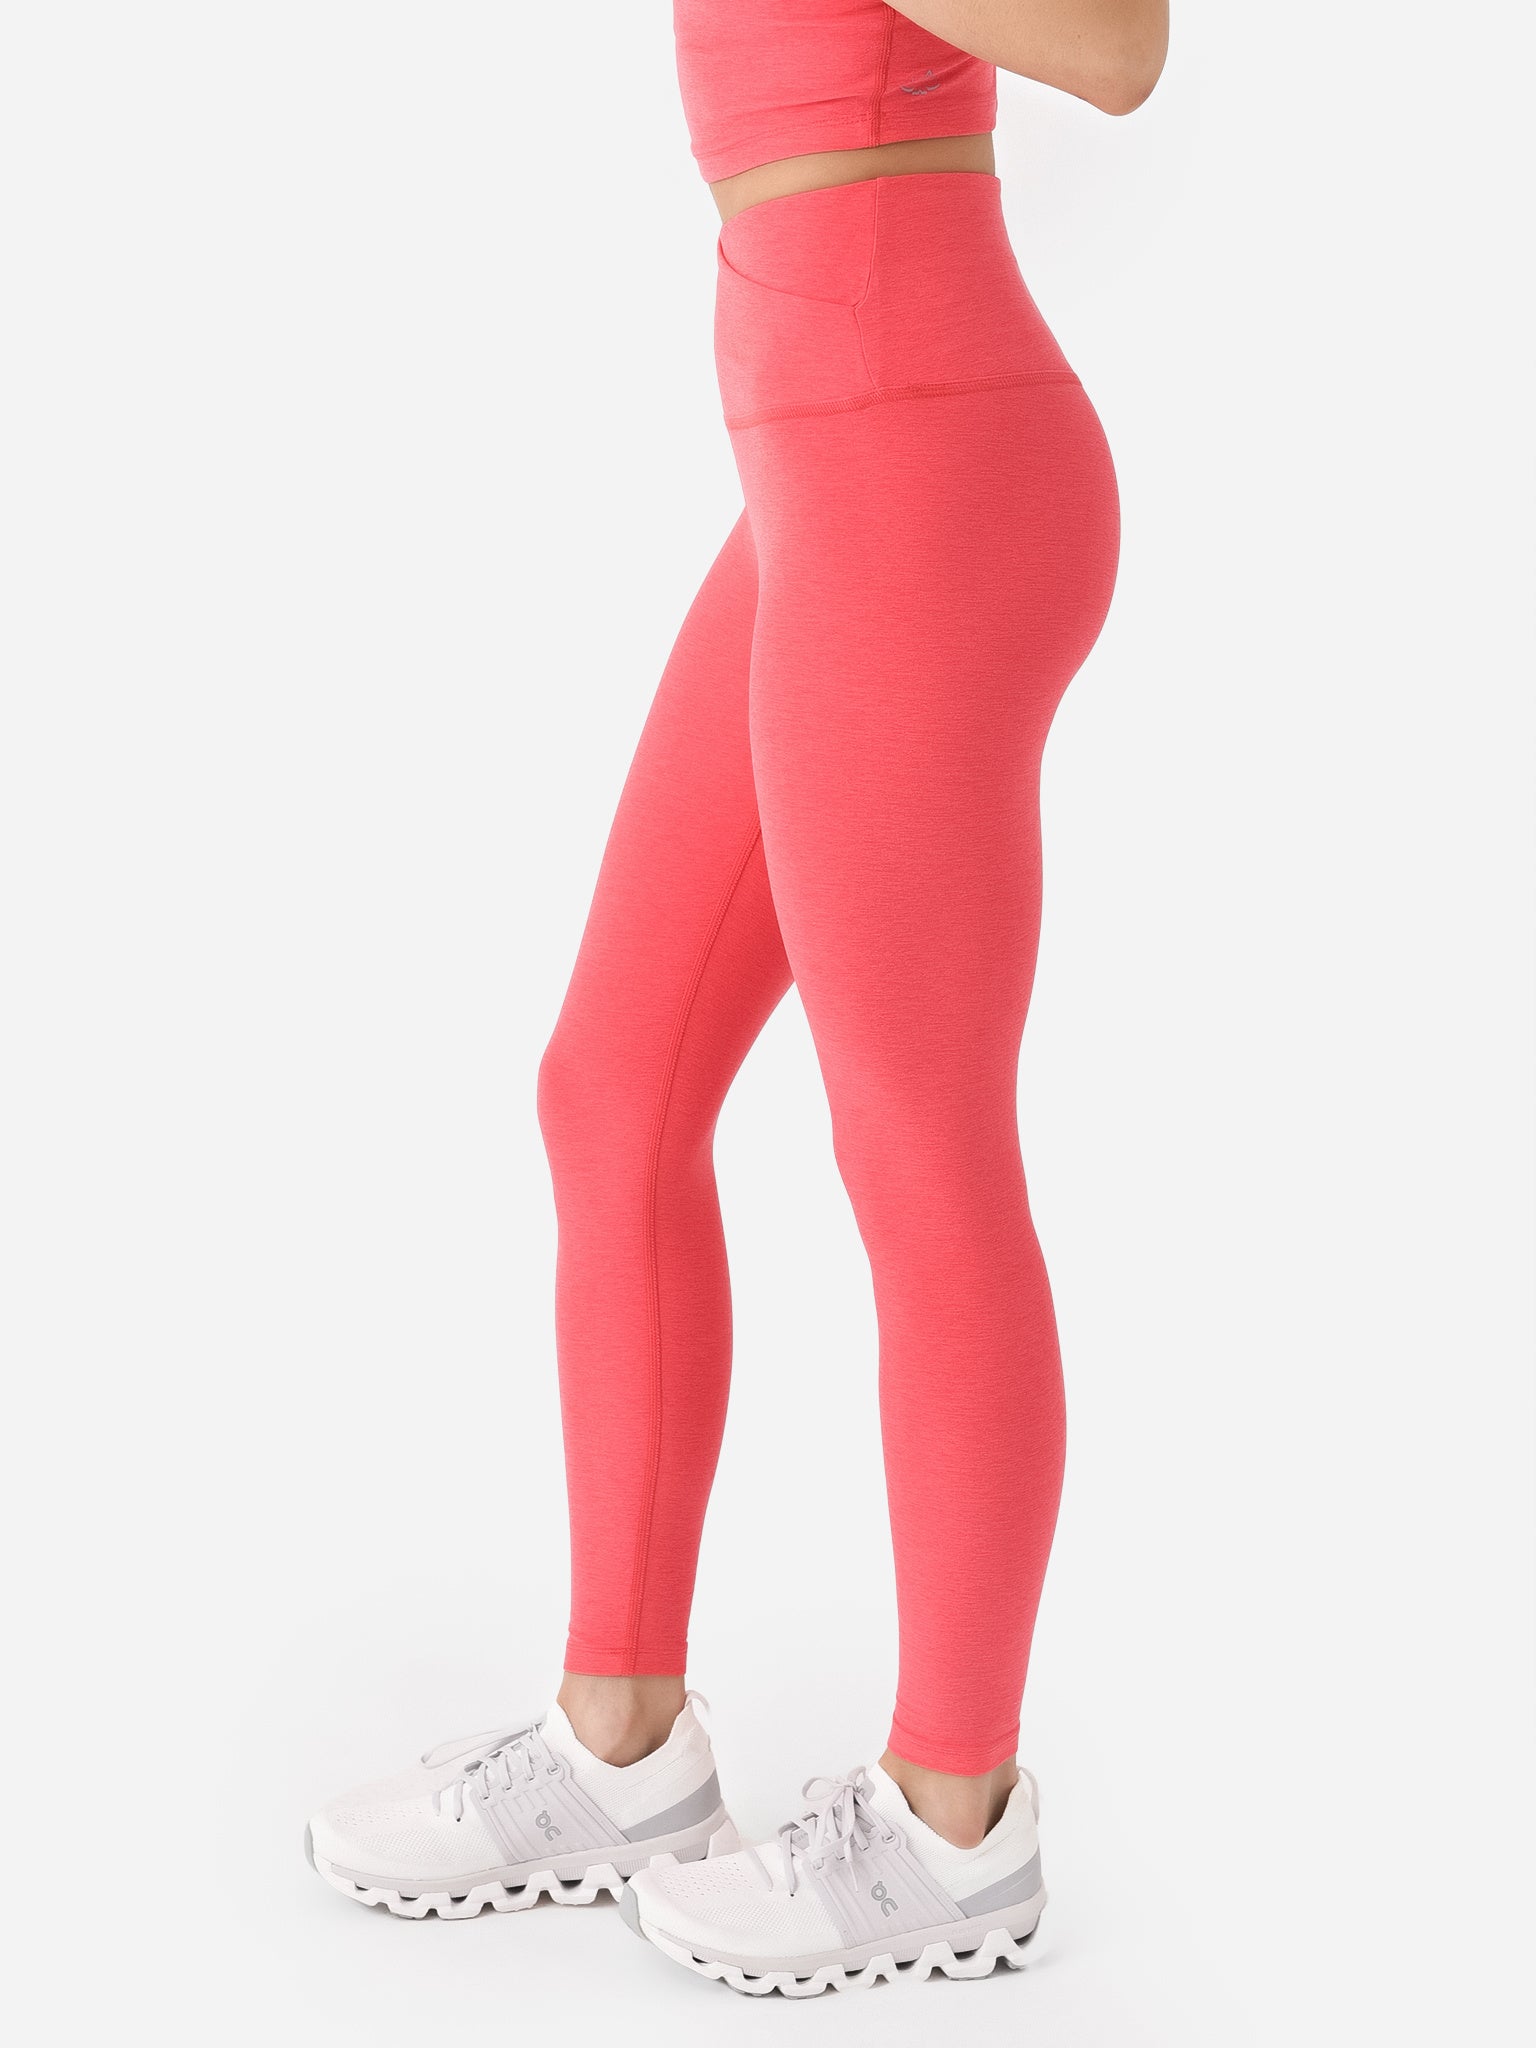  Beyond Yoga Women's Spacedye at Your Leisure High